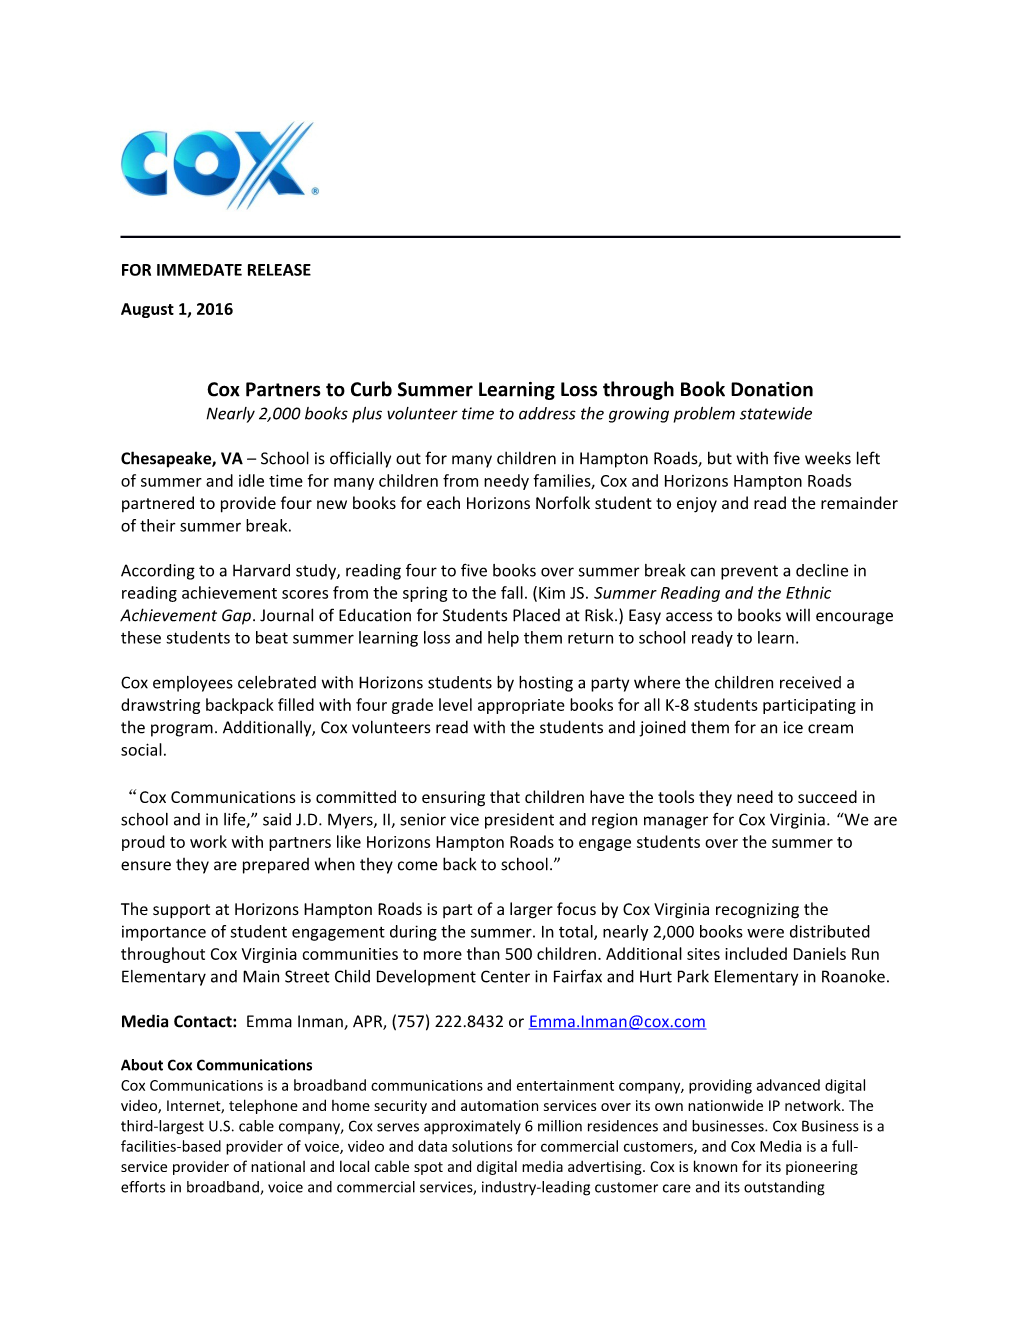 Cox Partners to Curb Summer Learning Loss Through Book Donation